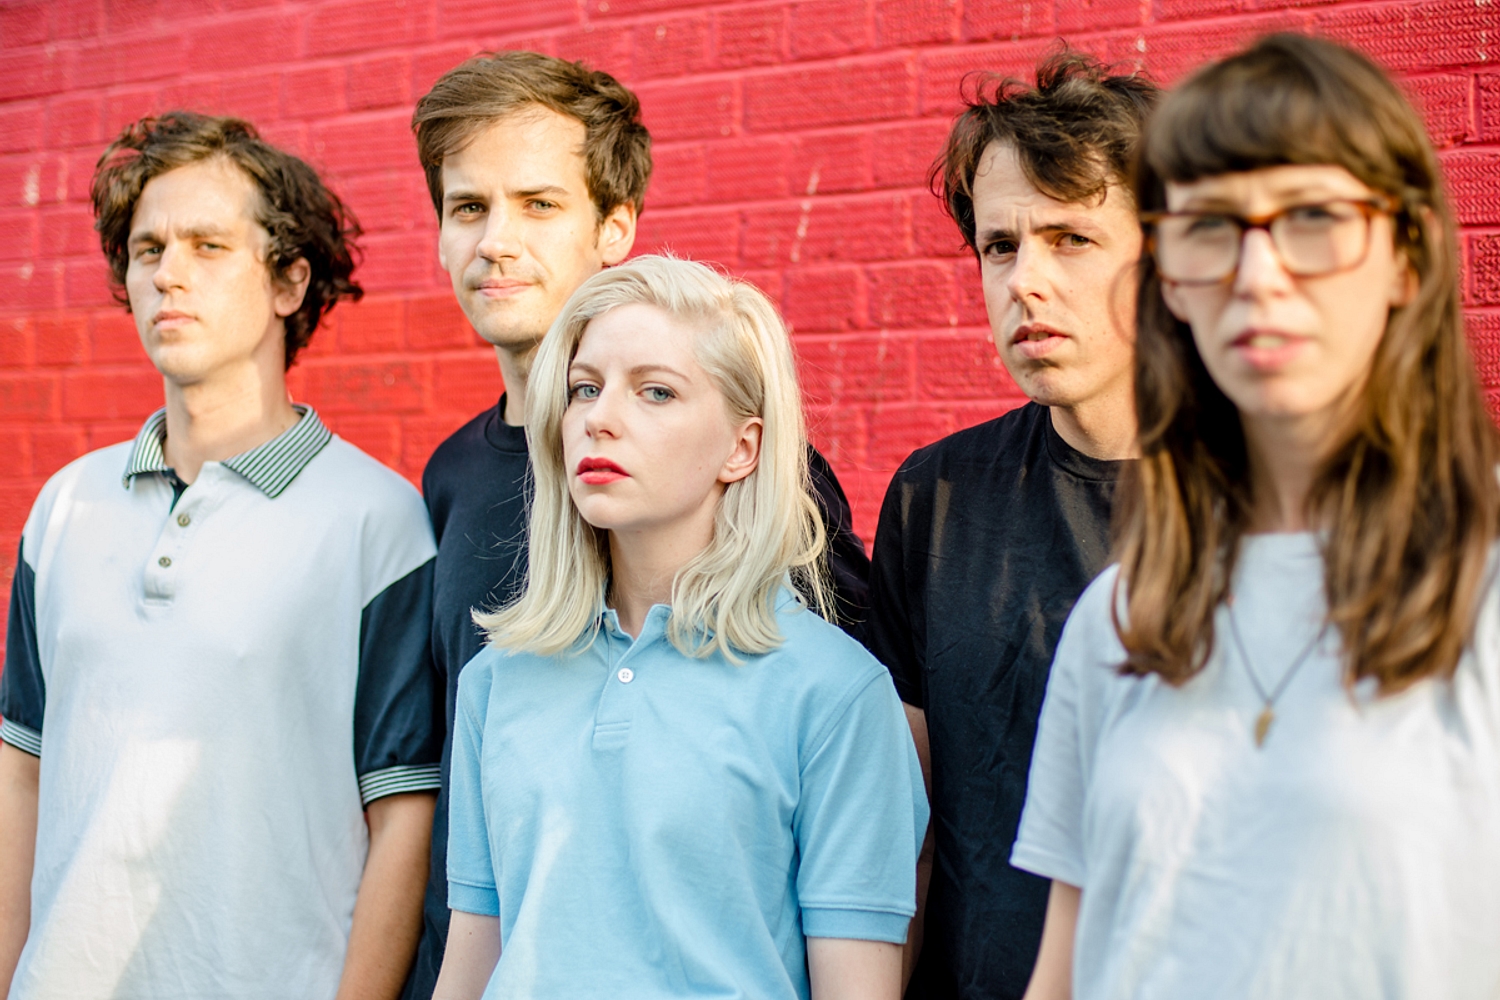 Alvvays talk second albums and crate karting bros ahead of playing Reading Leeds 2015